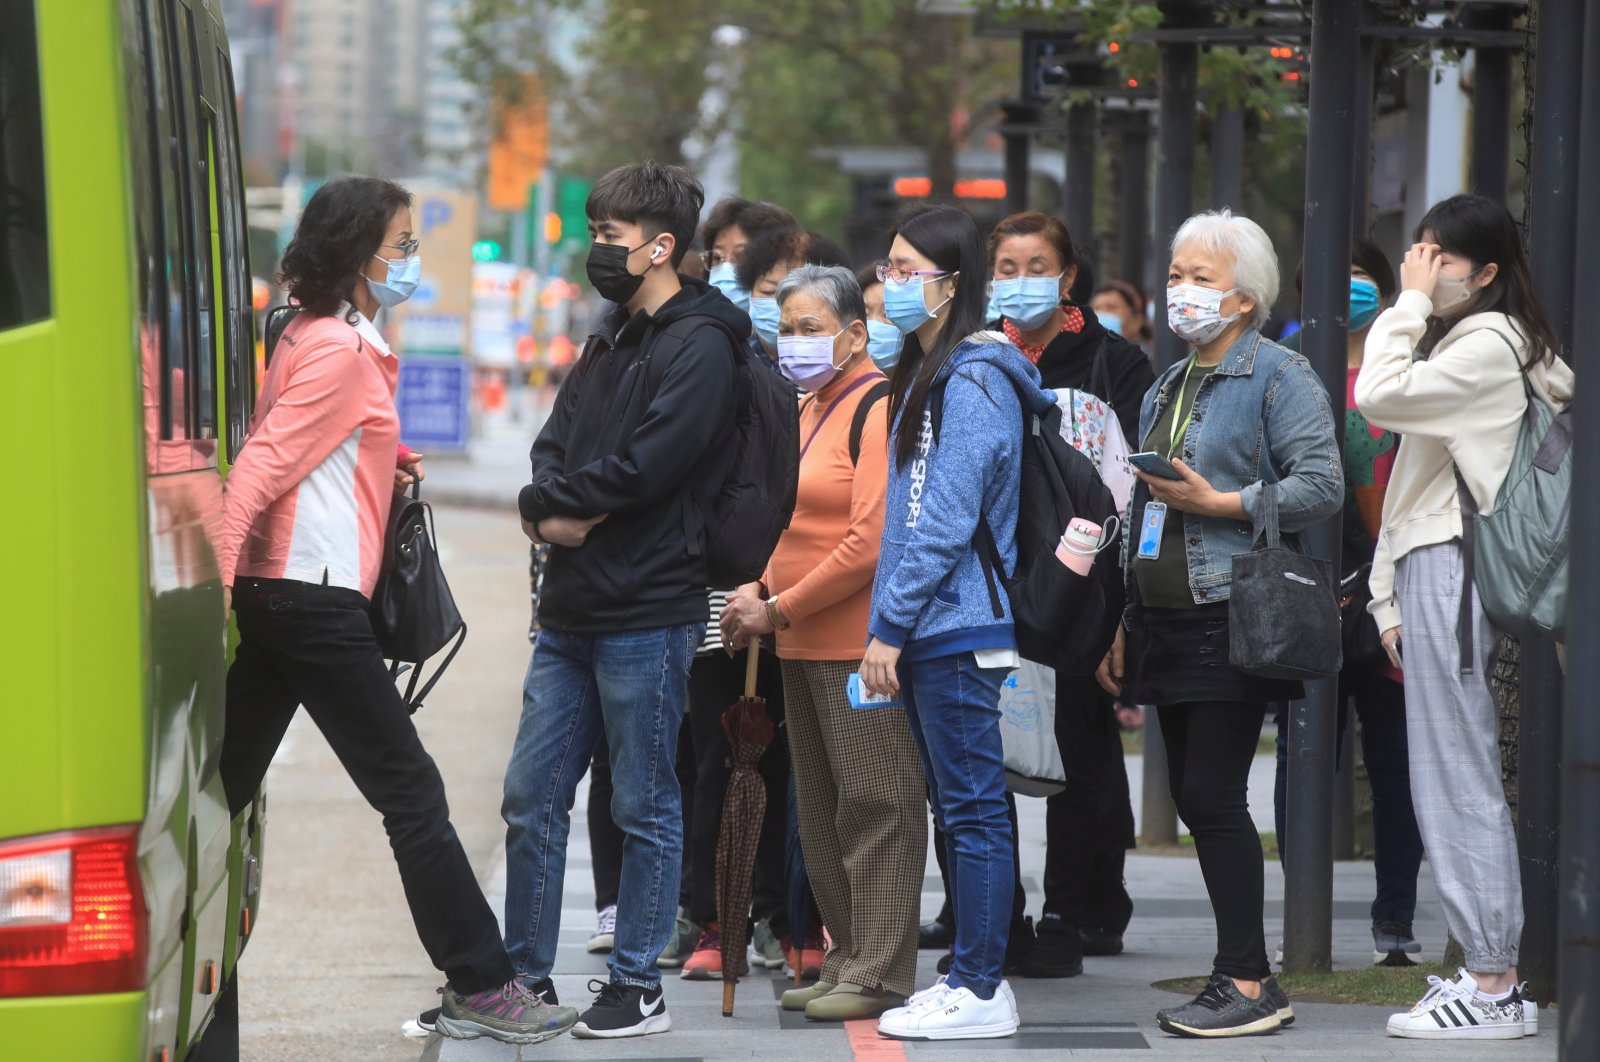 People wearing masks to prevent the spread of COVID-19 wait at a bus stop in Taipei, Taiwan, Nov. 30, 2021. (Reuters Photo)